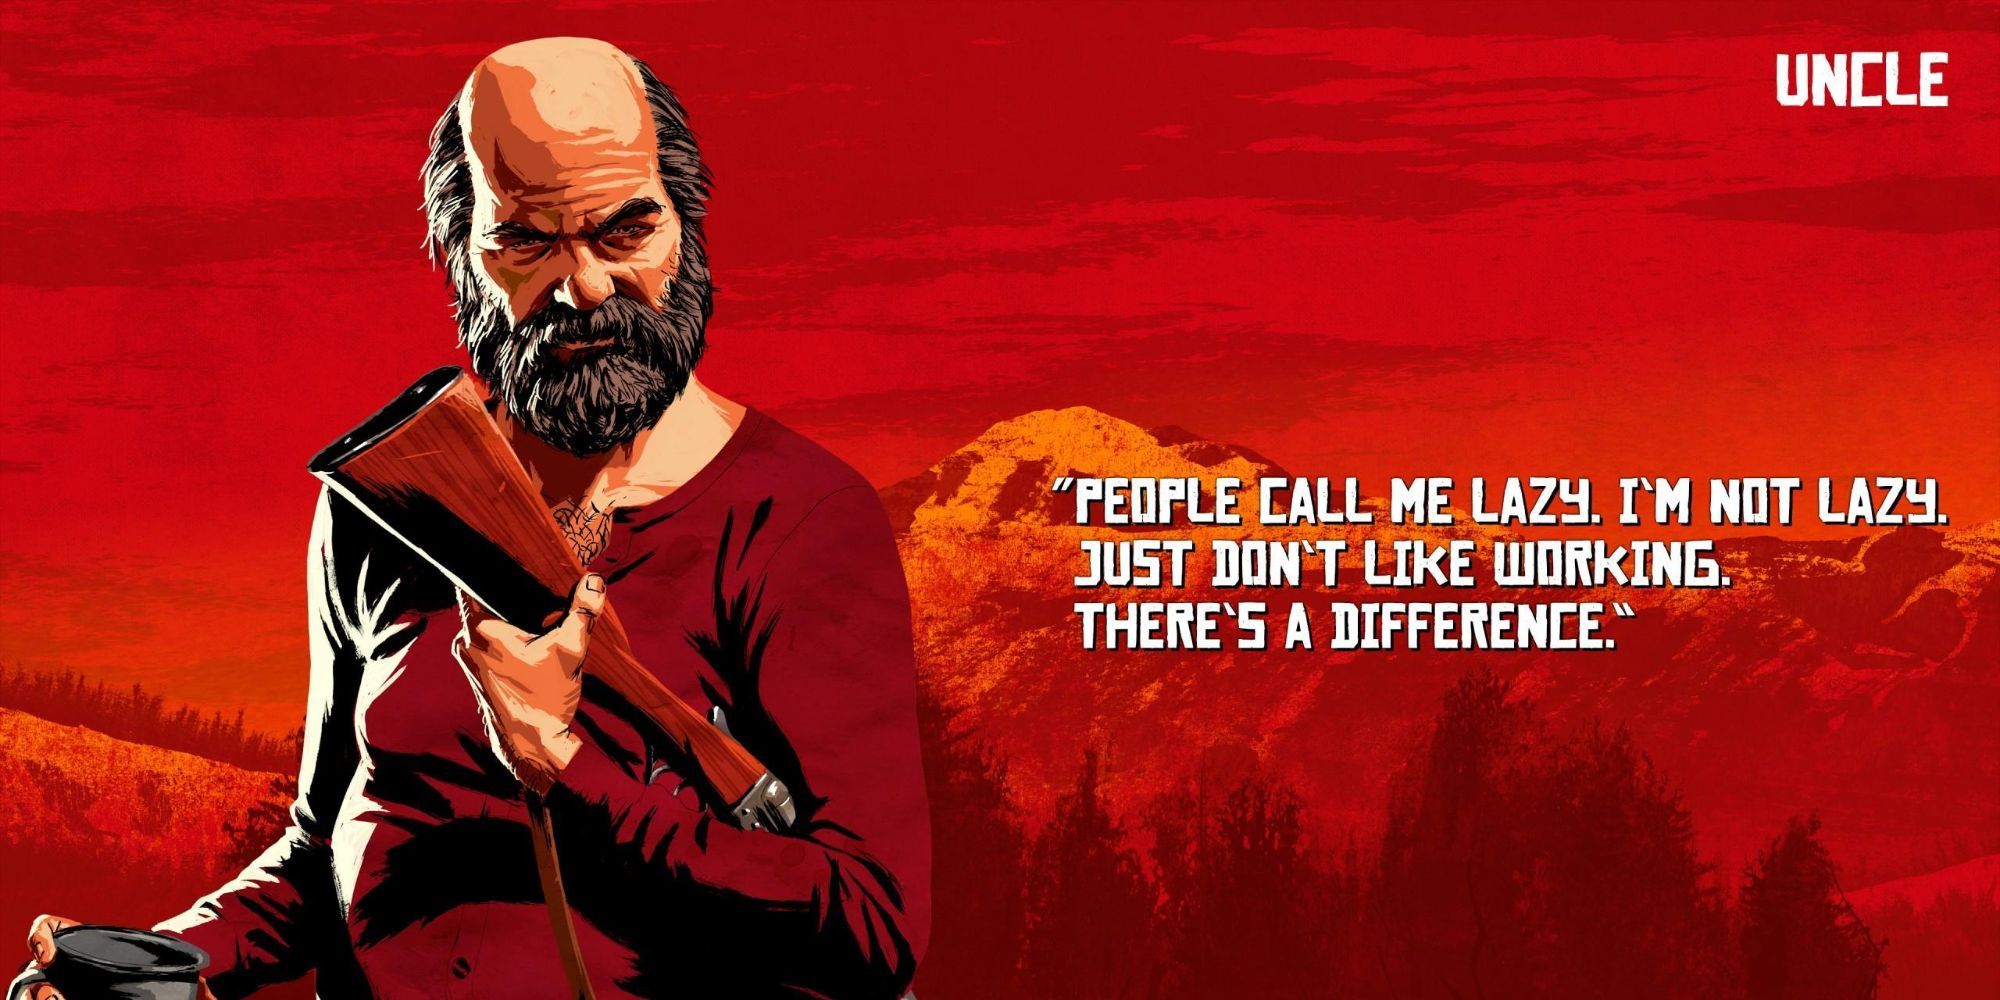 RDR2 art of Uncle with quote